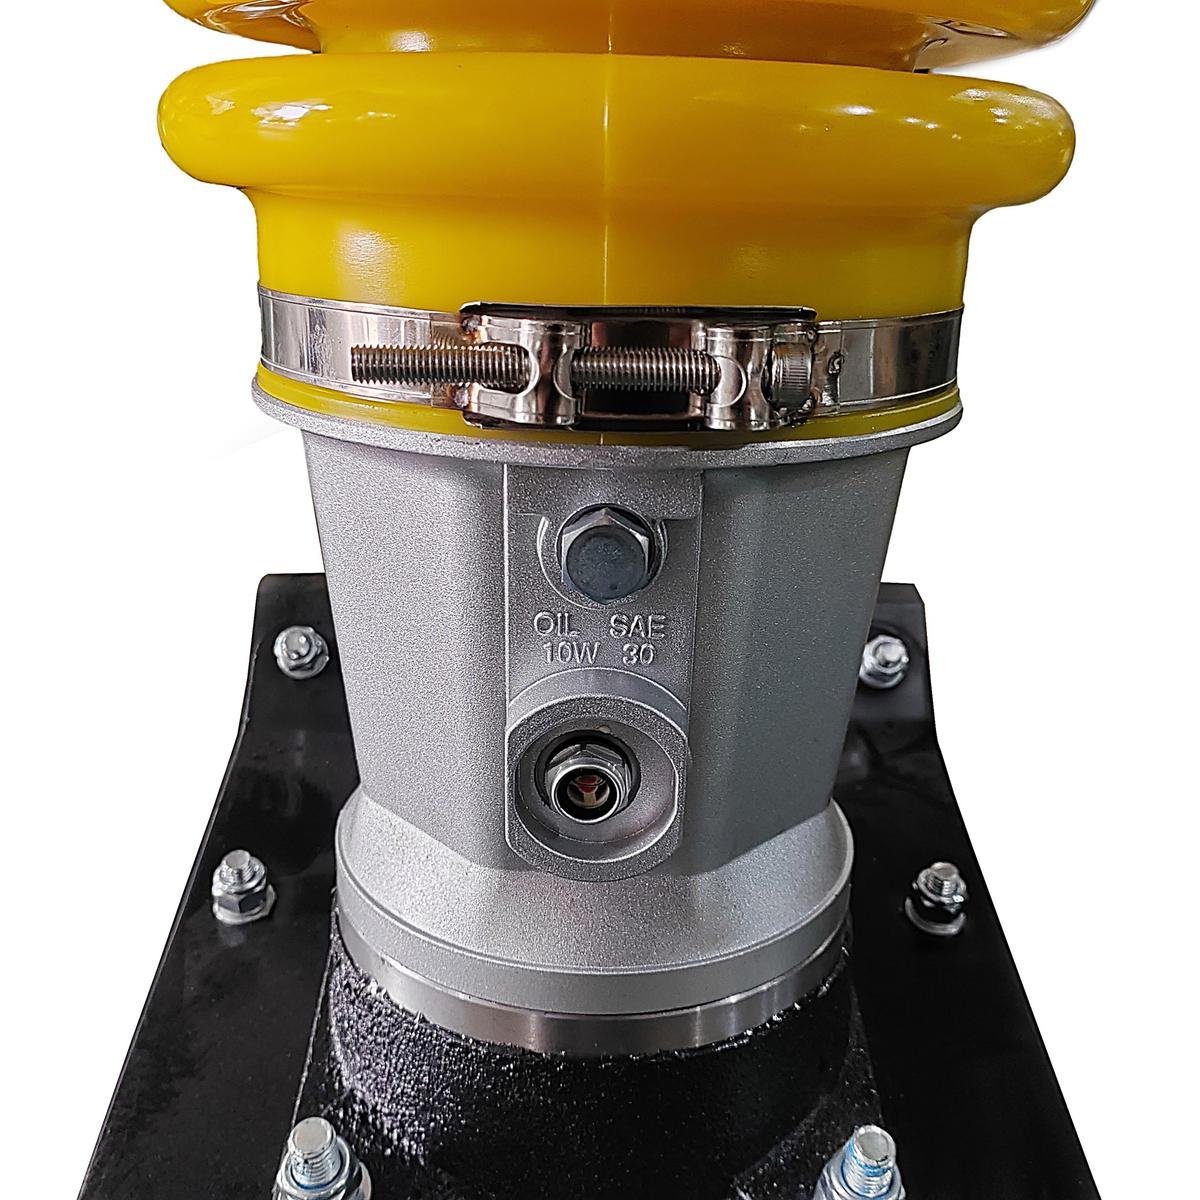 Value Industrial Tamping Rammer